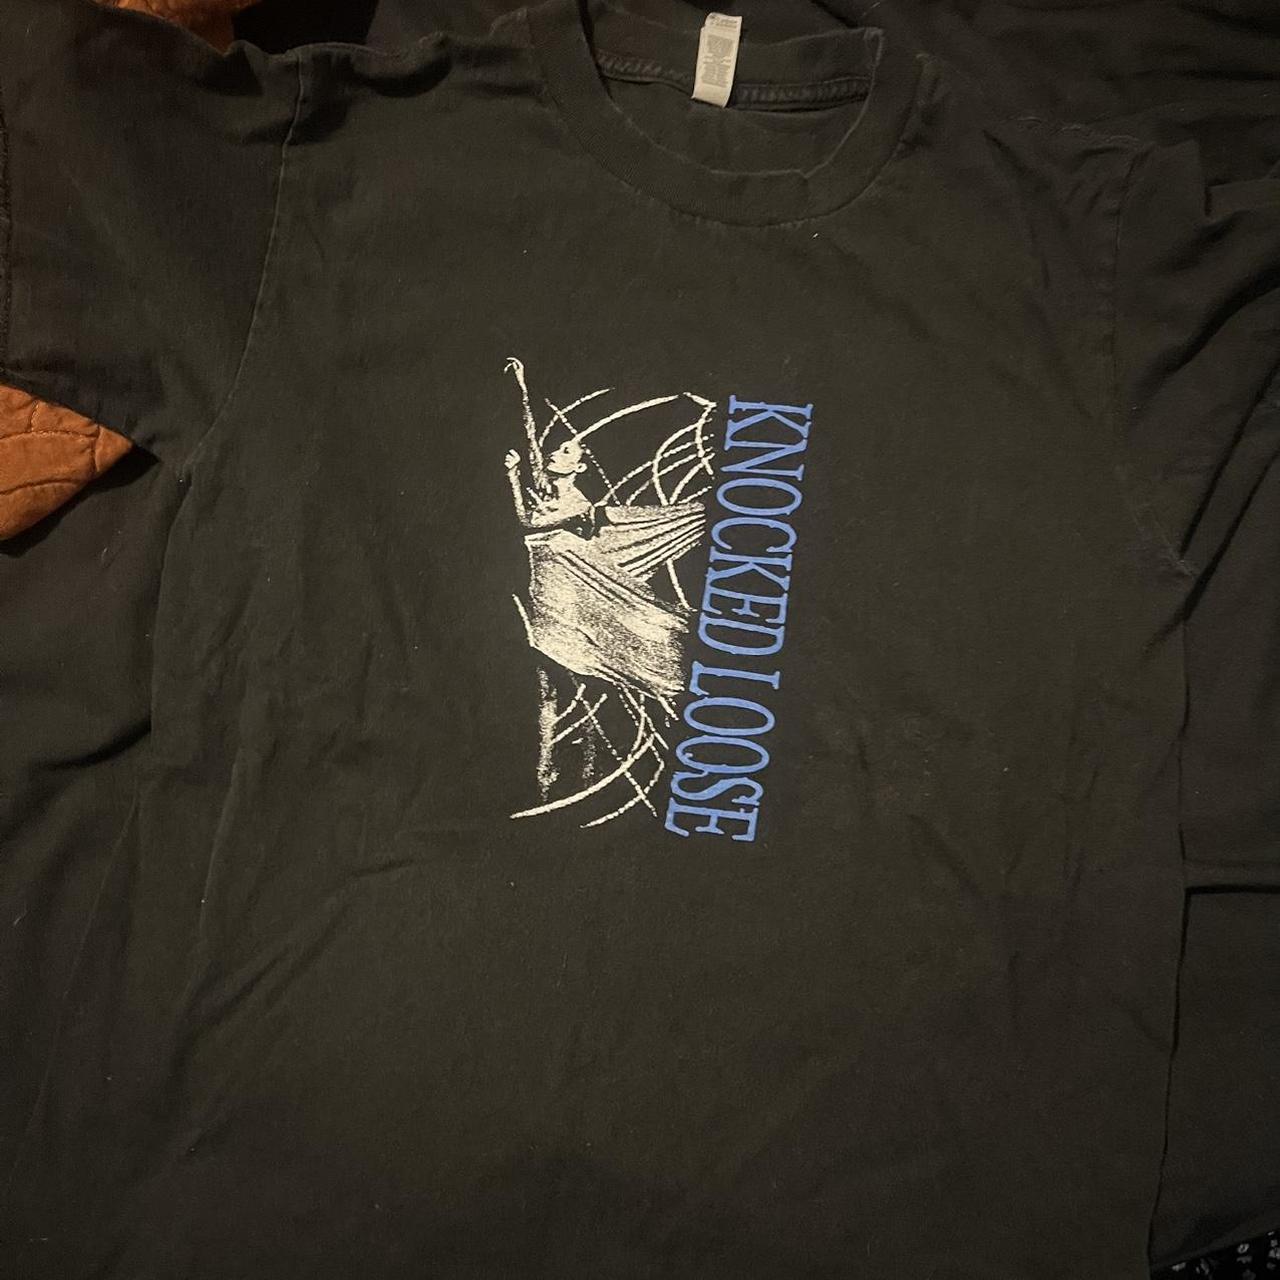 Knocked Loose ‘A Different Shade of Blue’ Tour Shirt... - Depop